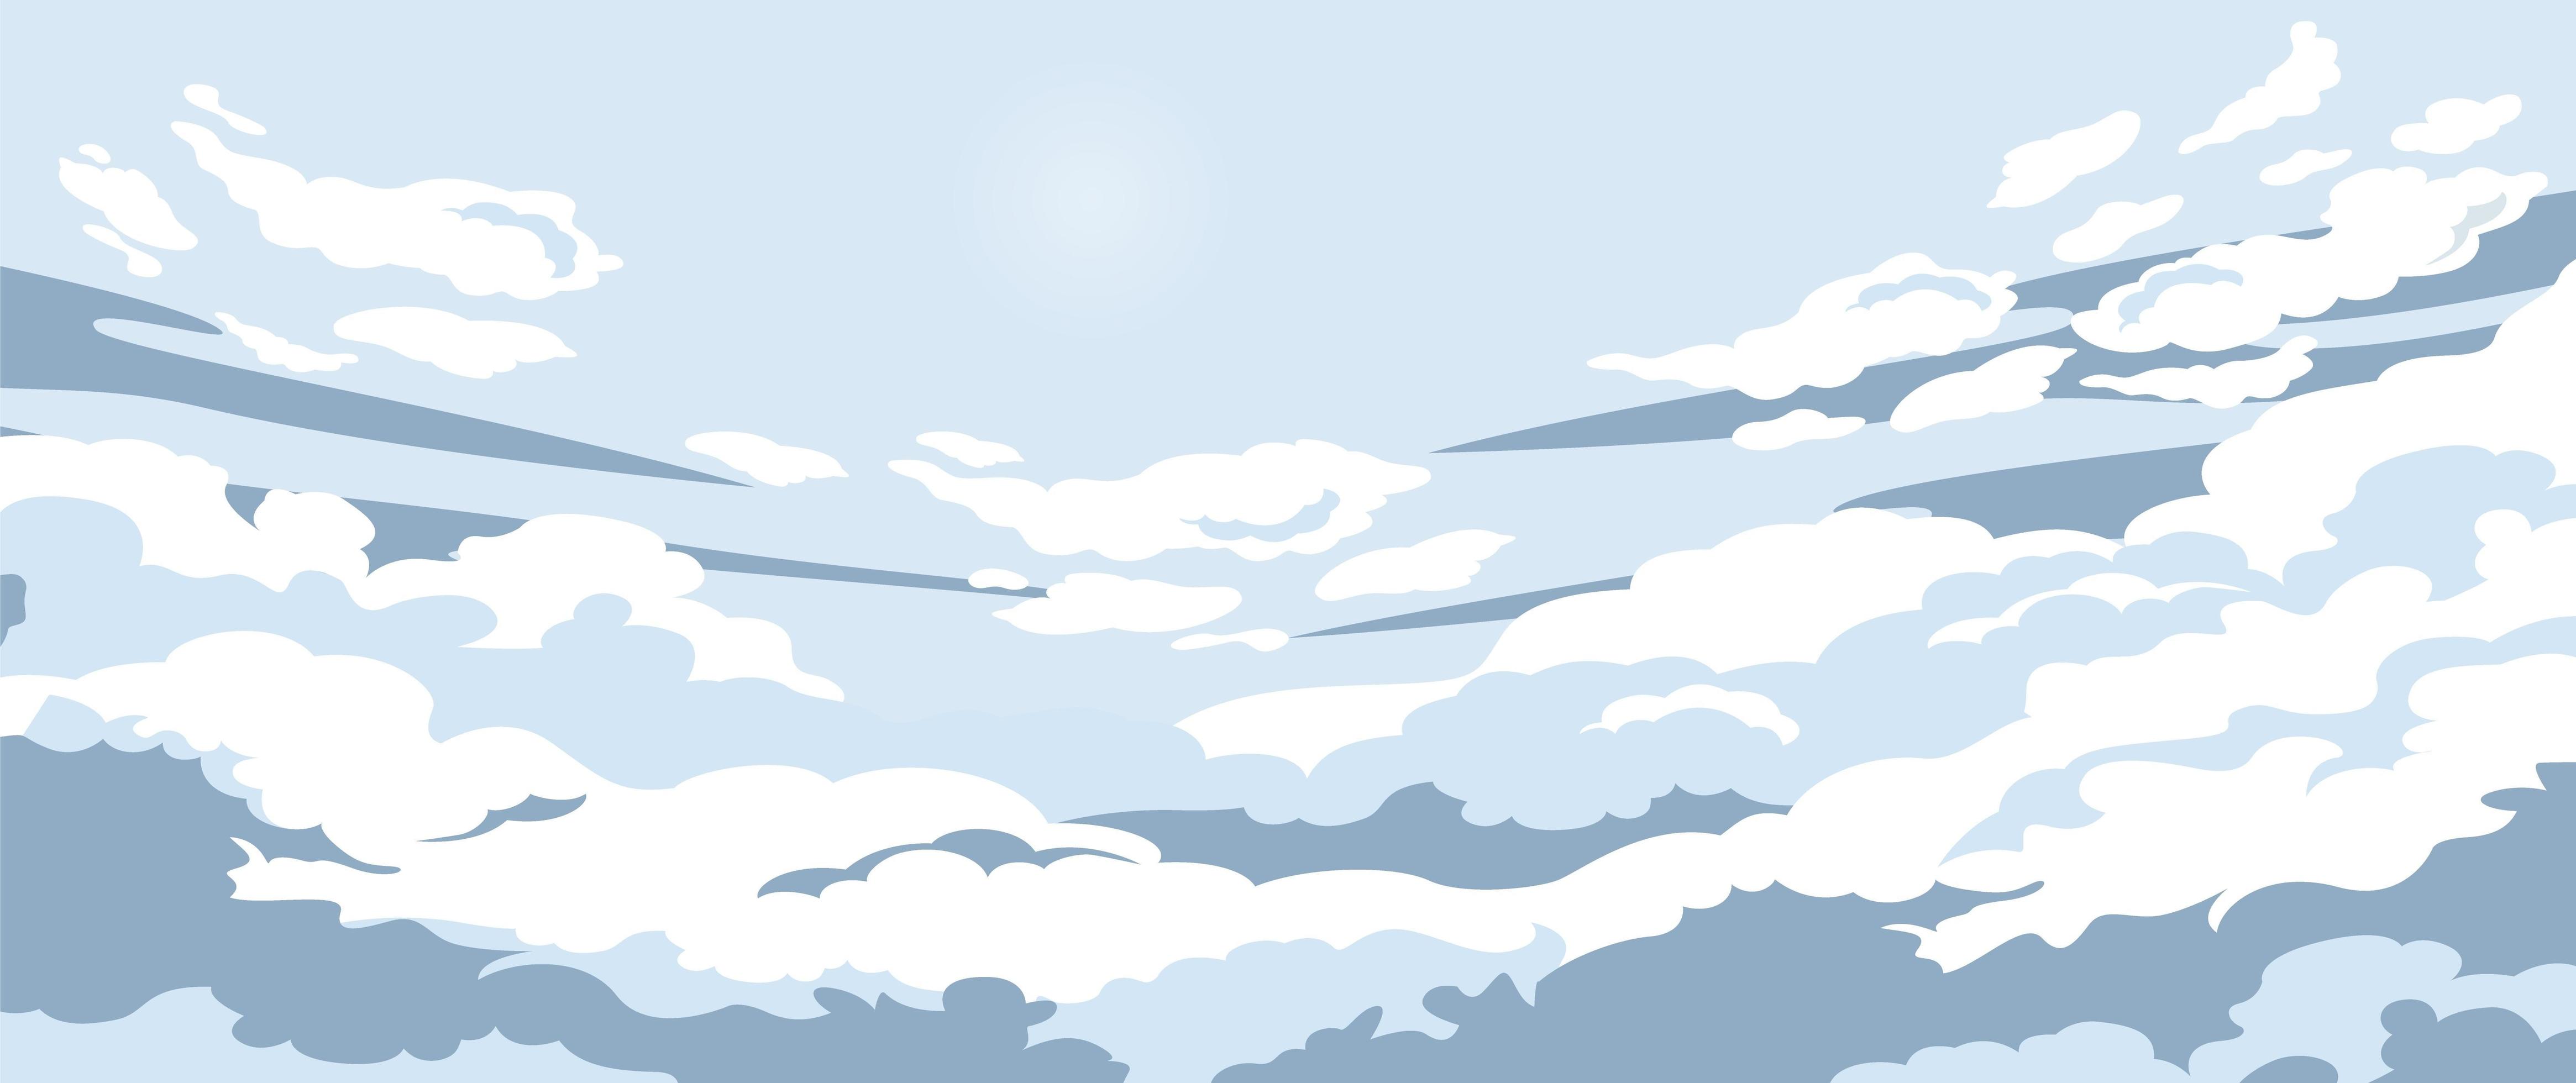 Clouds on Blue Sky vector